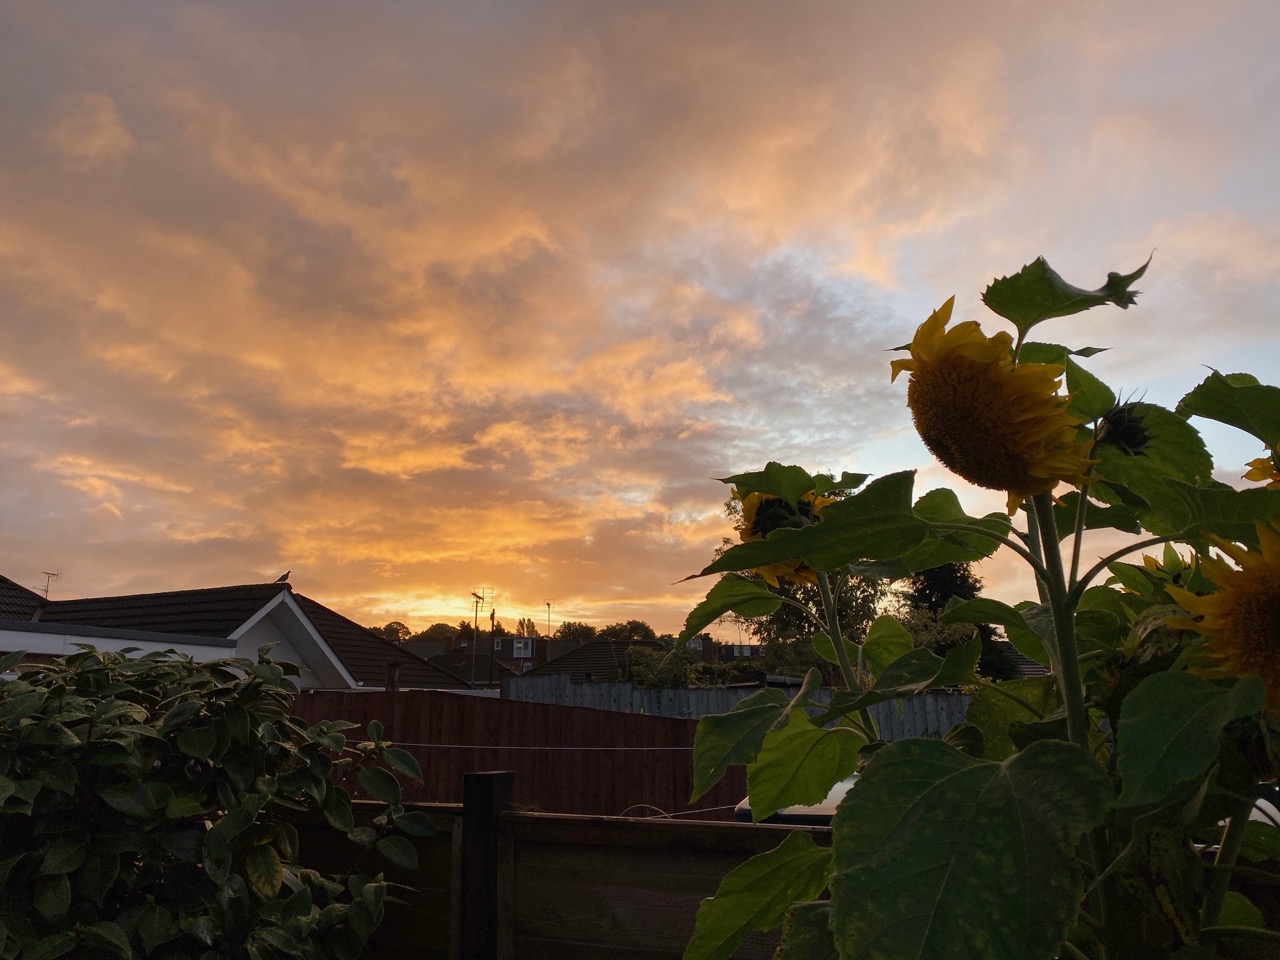 Sunflowers in early autumn sunrise with pink sky